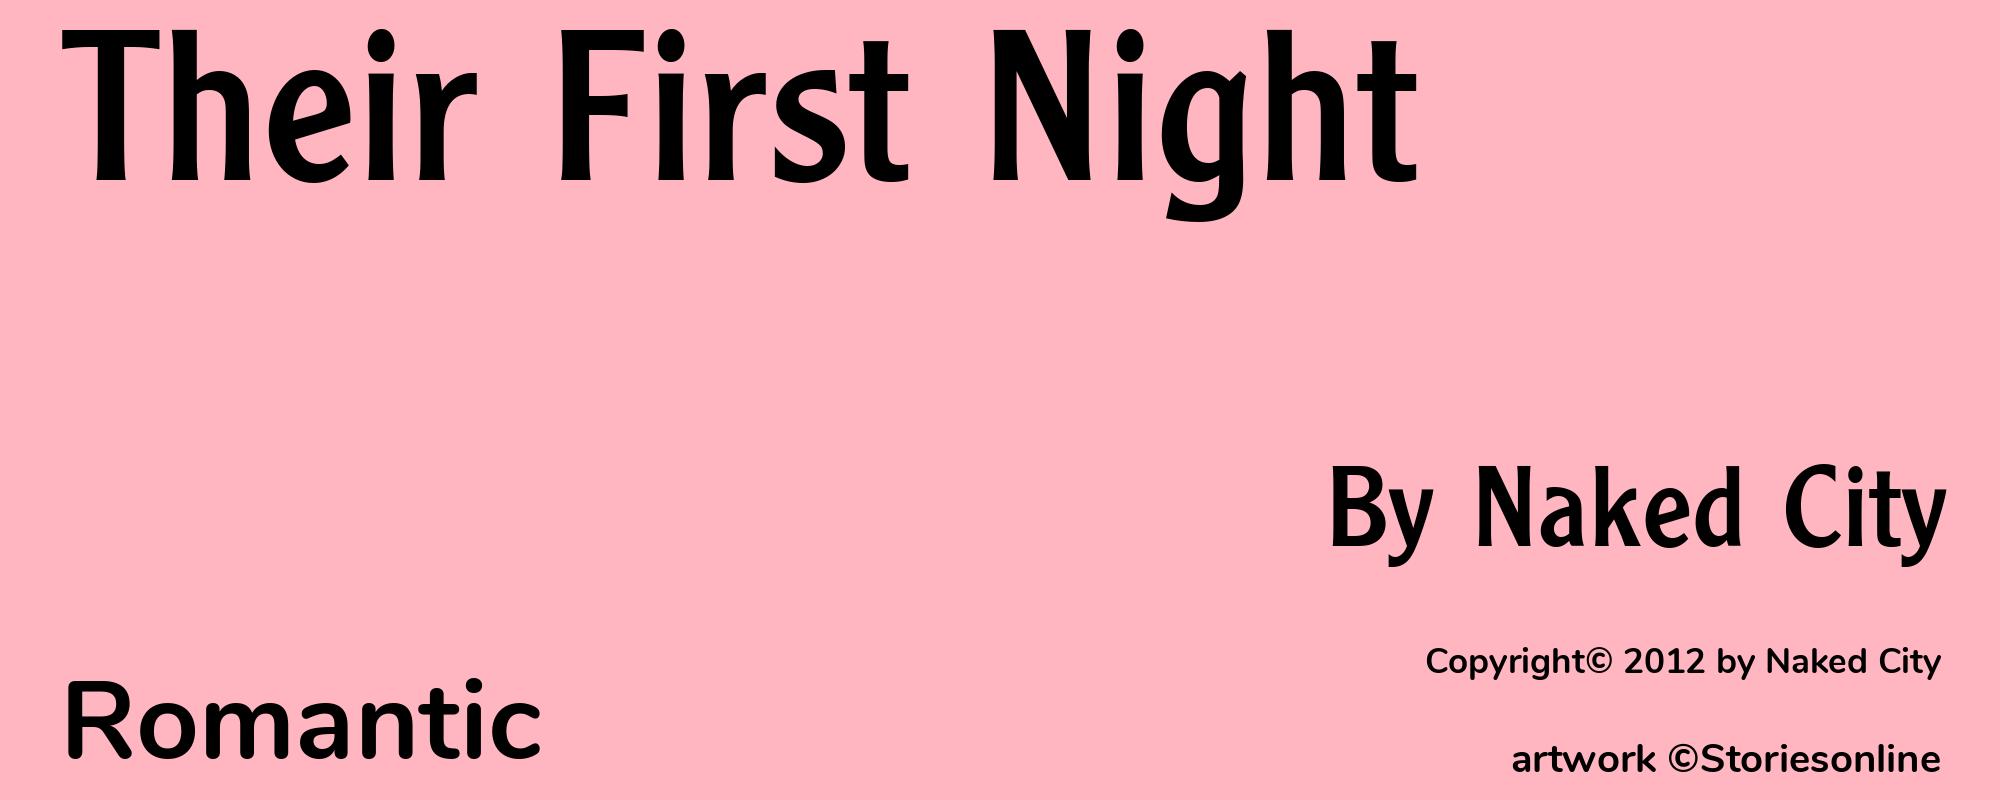 Their First Night - Cover